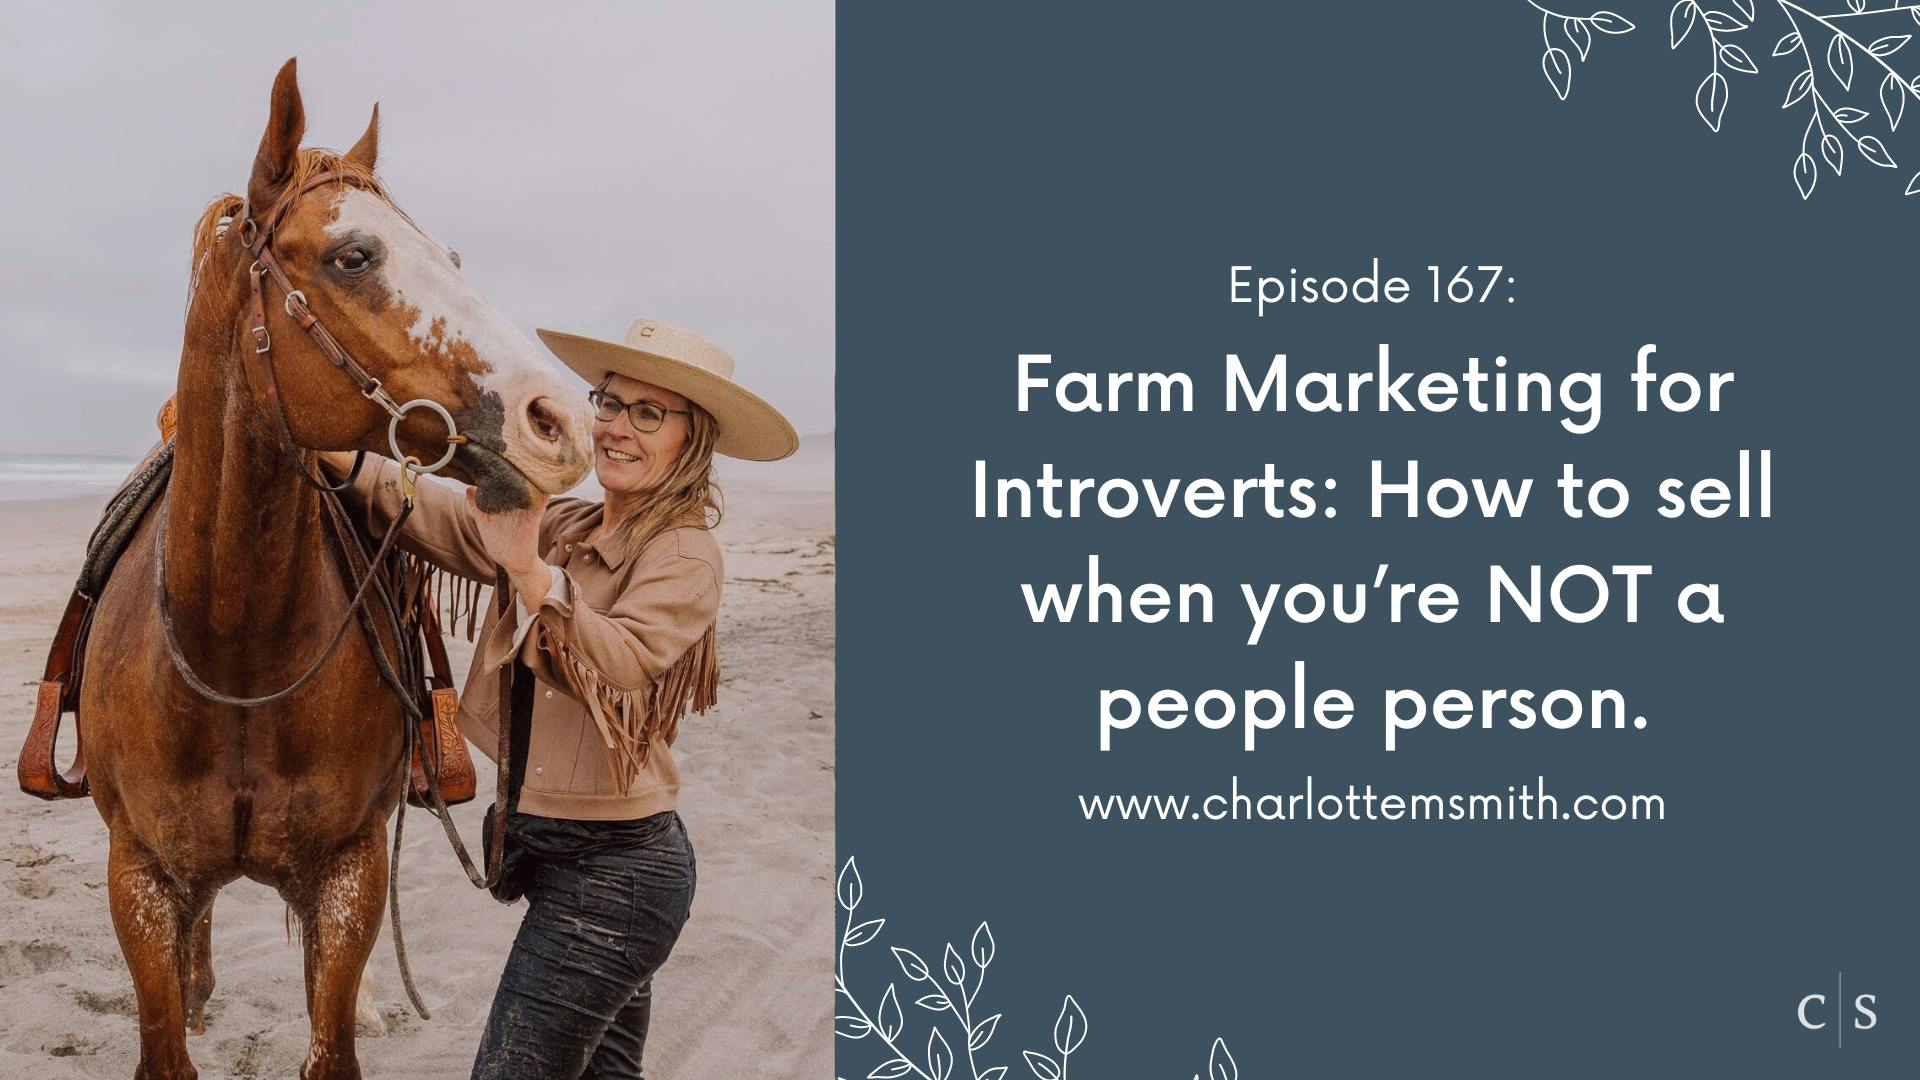 https://charlottemsmith.com/167-farm-marketing-for-introverts-how-to-sell-when-youre-not-a-people-person/